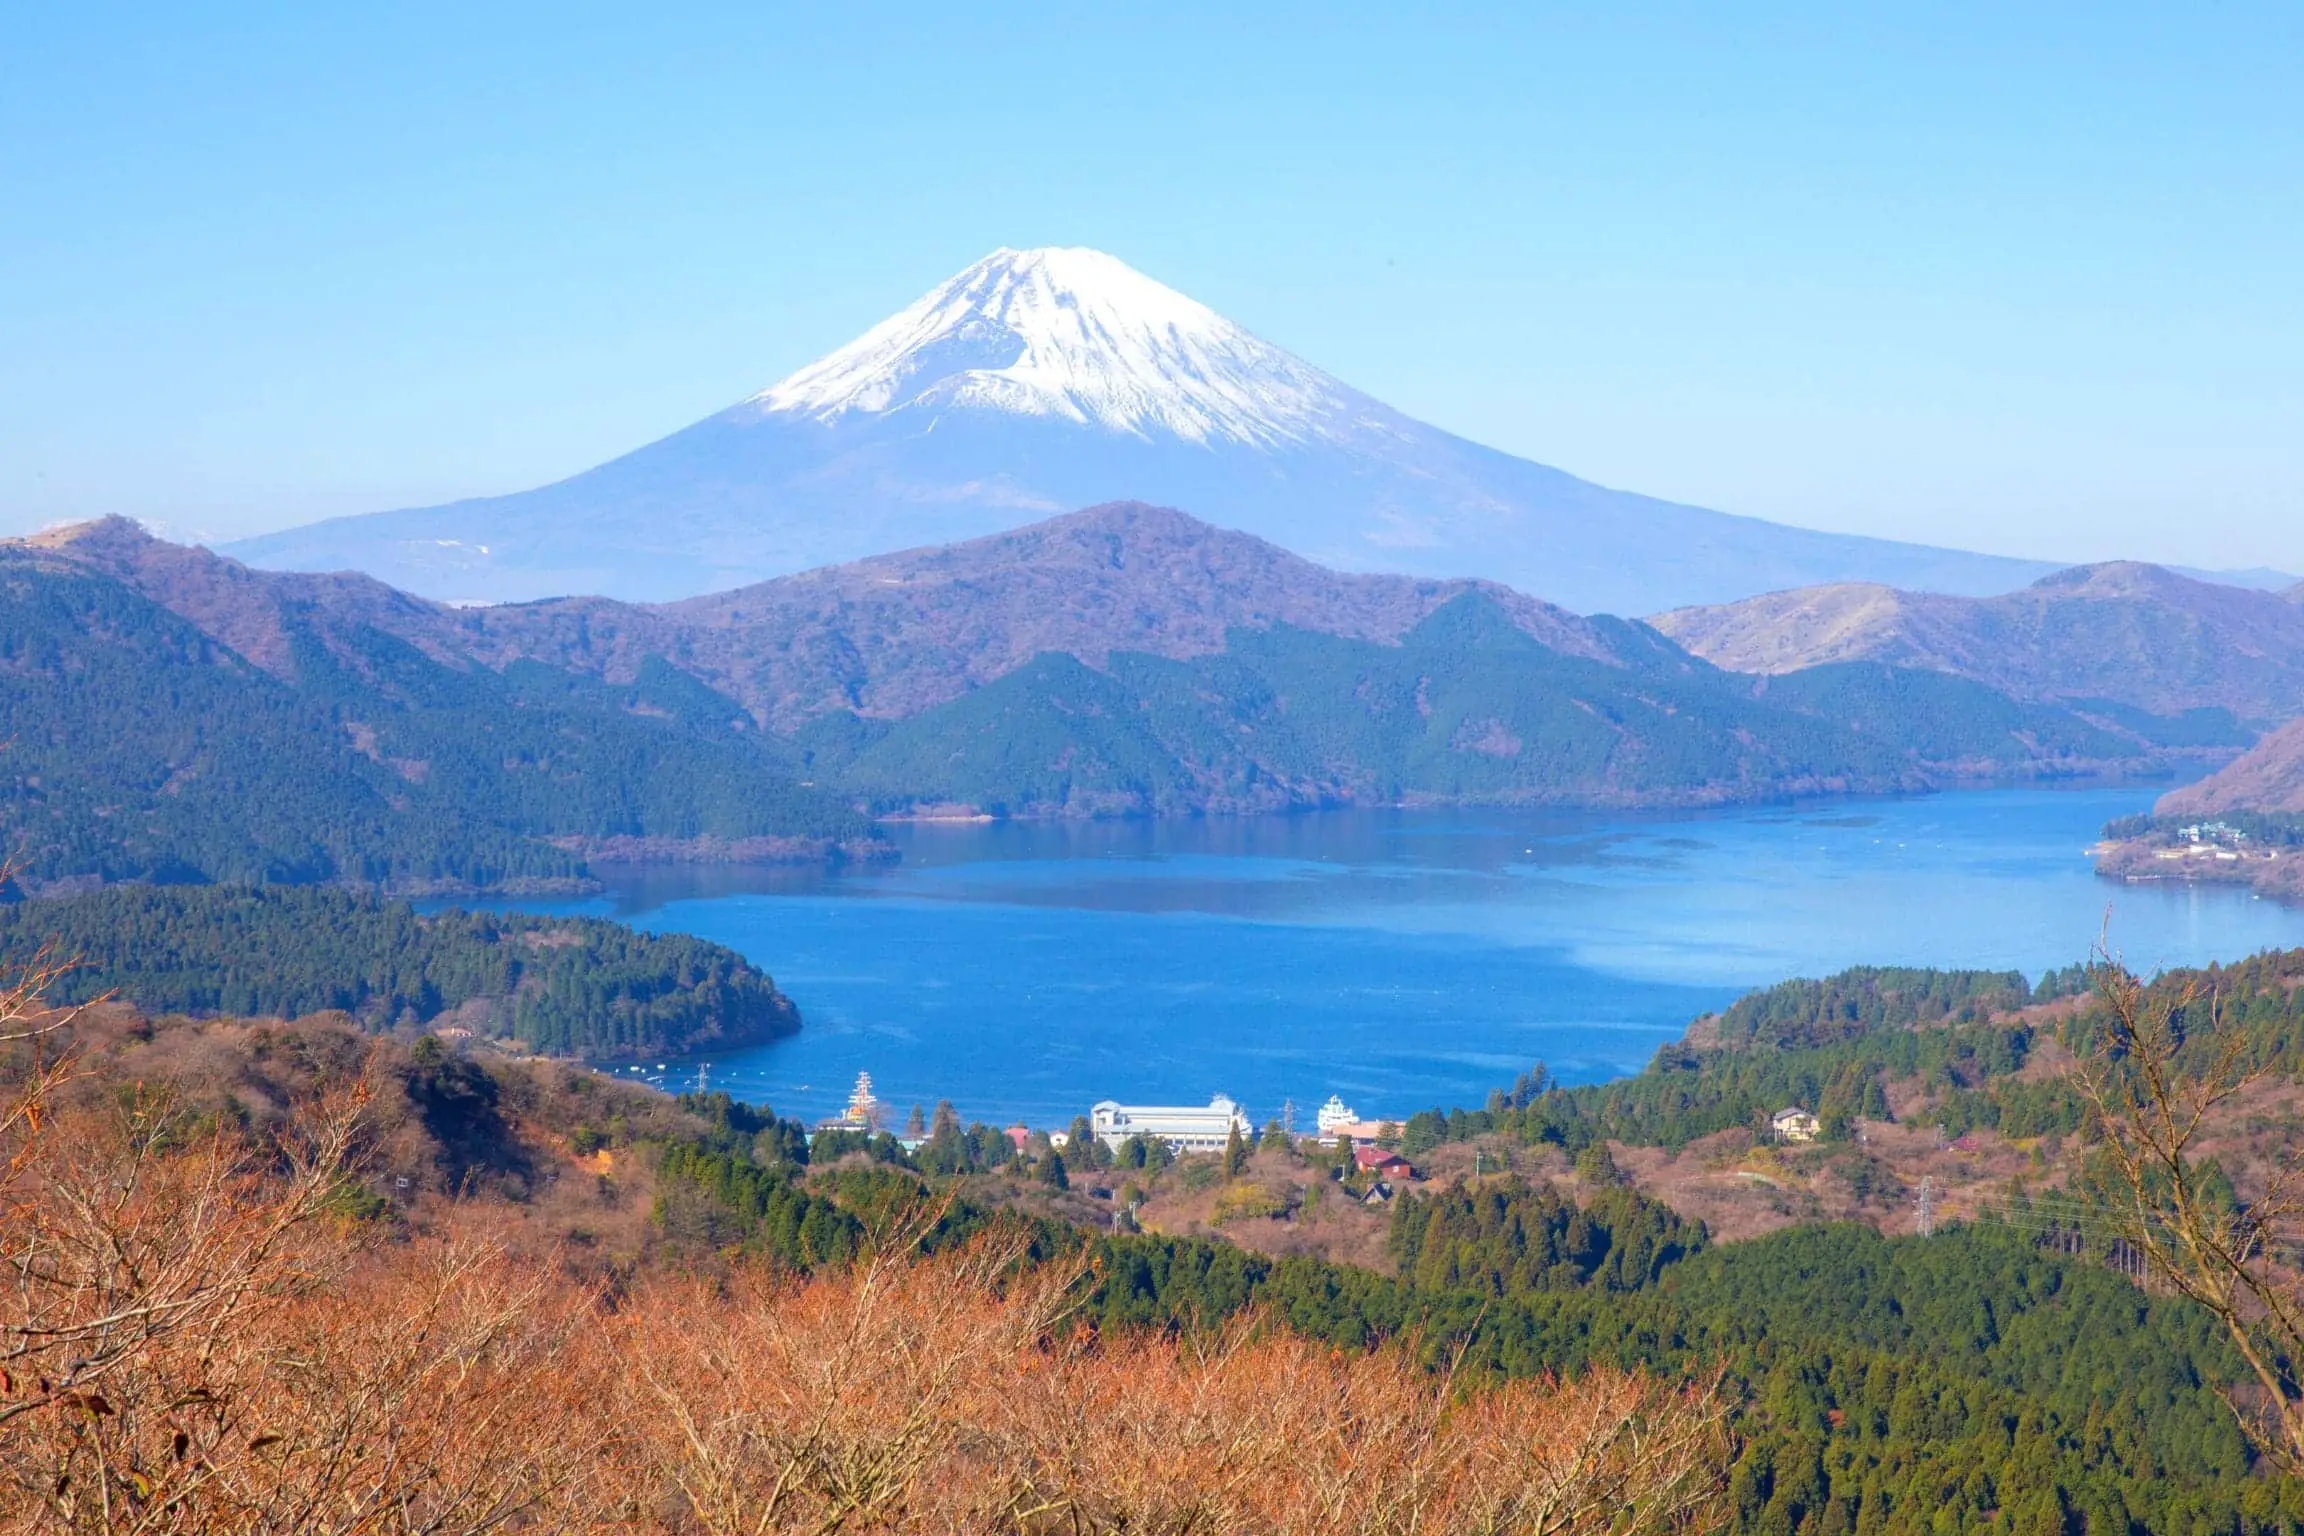 Forget Tokyo: Here are 5 Underrated Places in Central Japan to Visit Instead